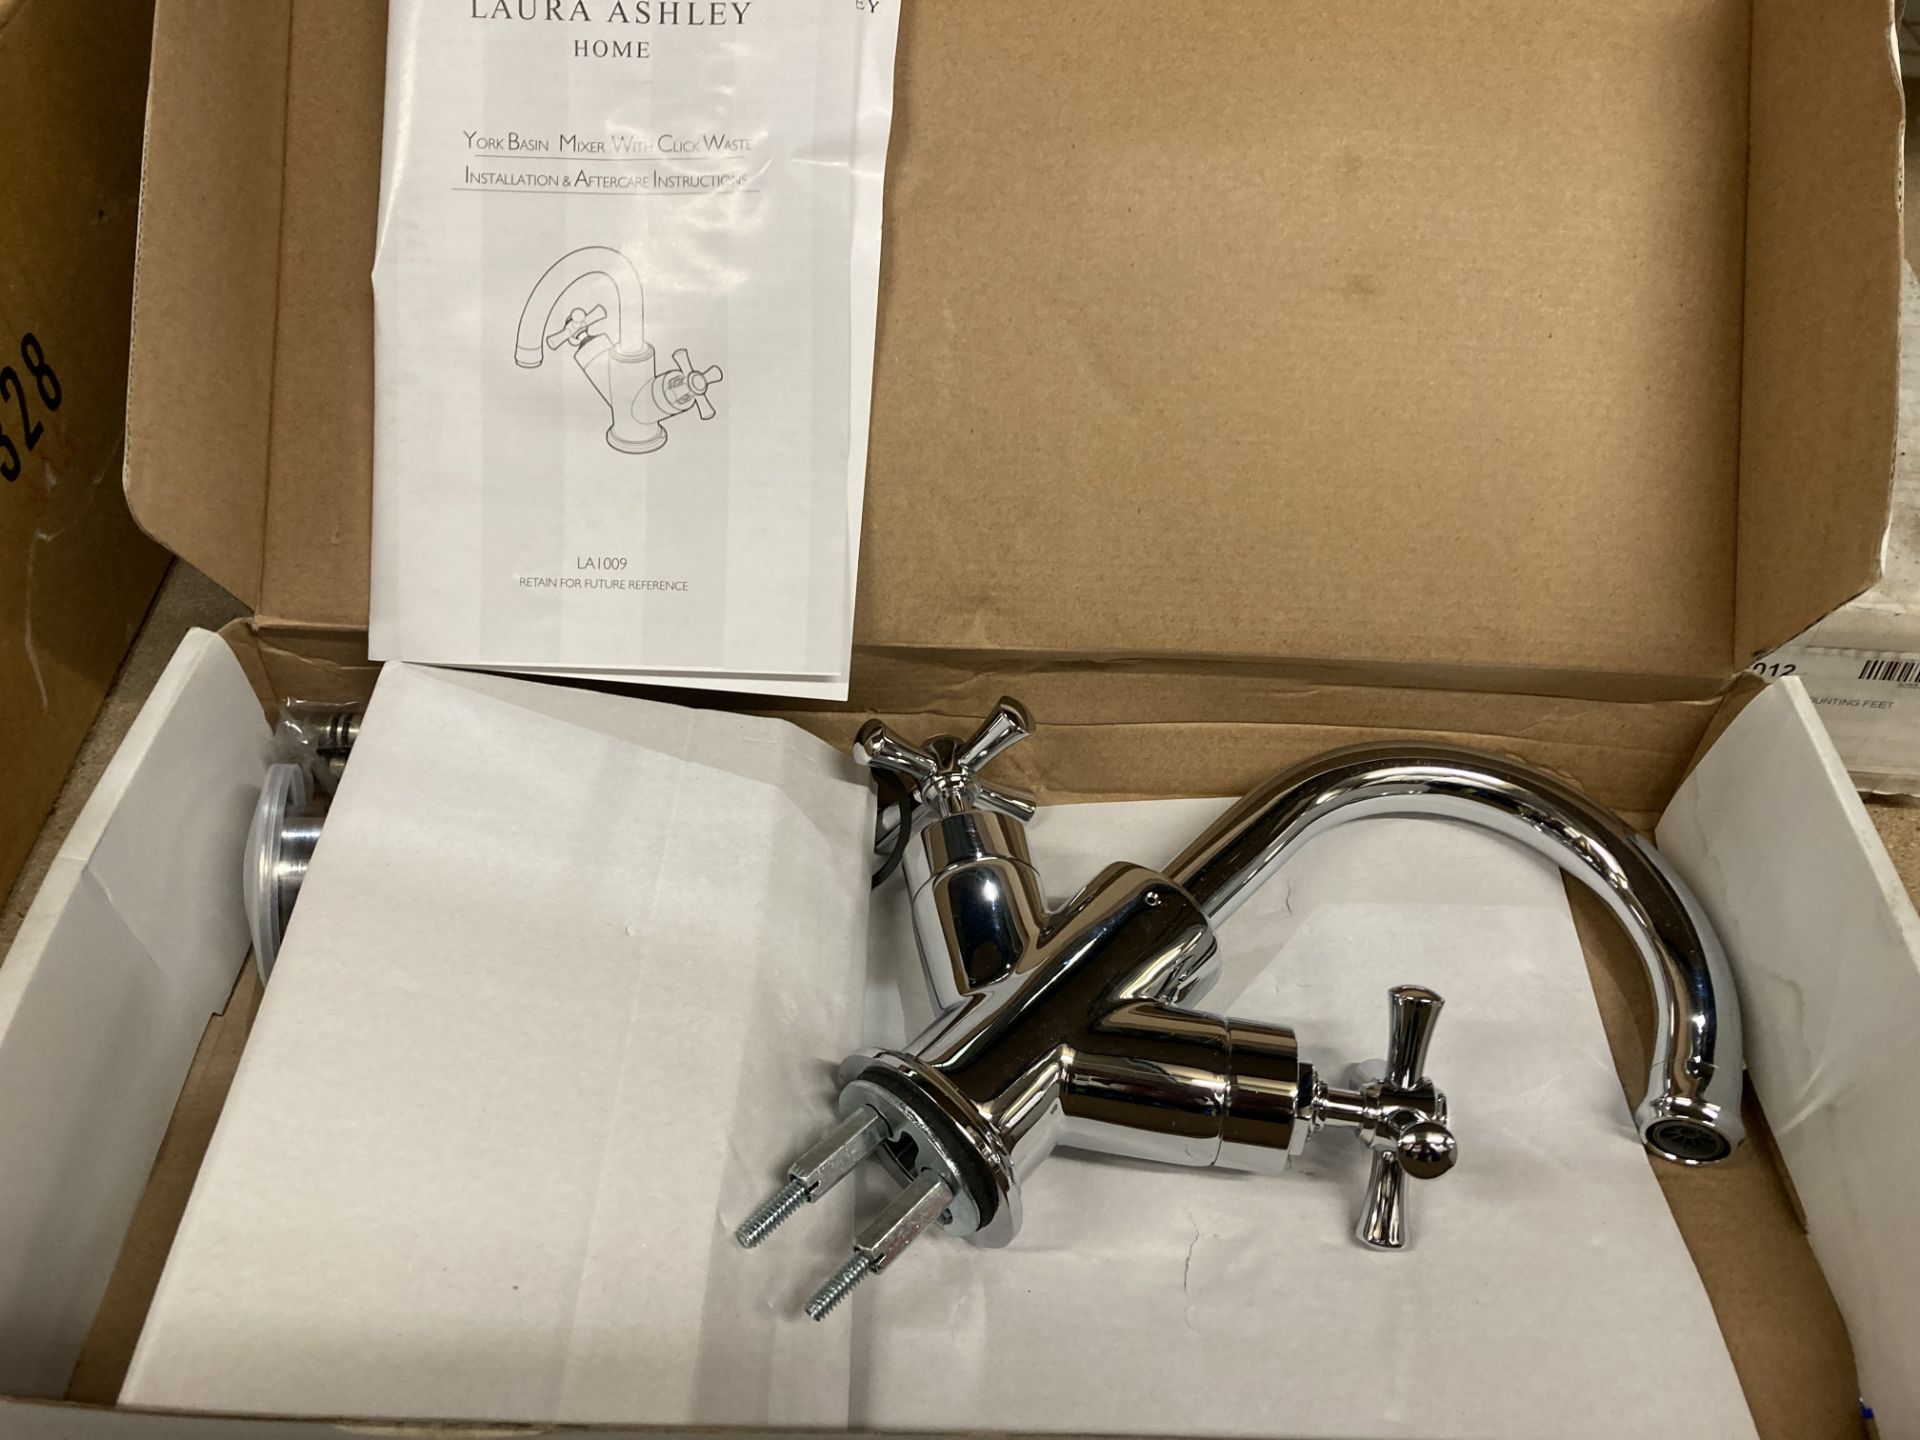 Laura Ashley York basin mixer tap with click waste (saleroom location: AA06) - Image 2 of 2